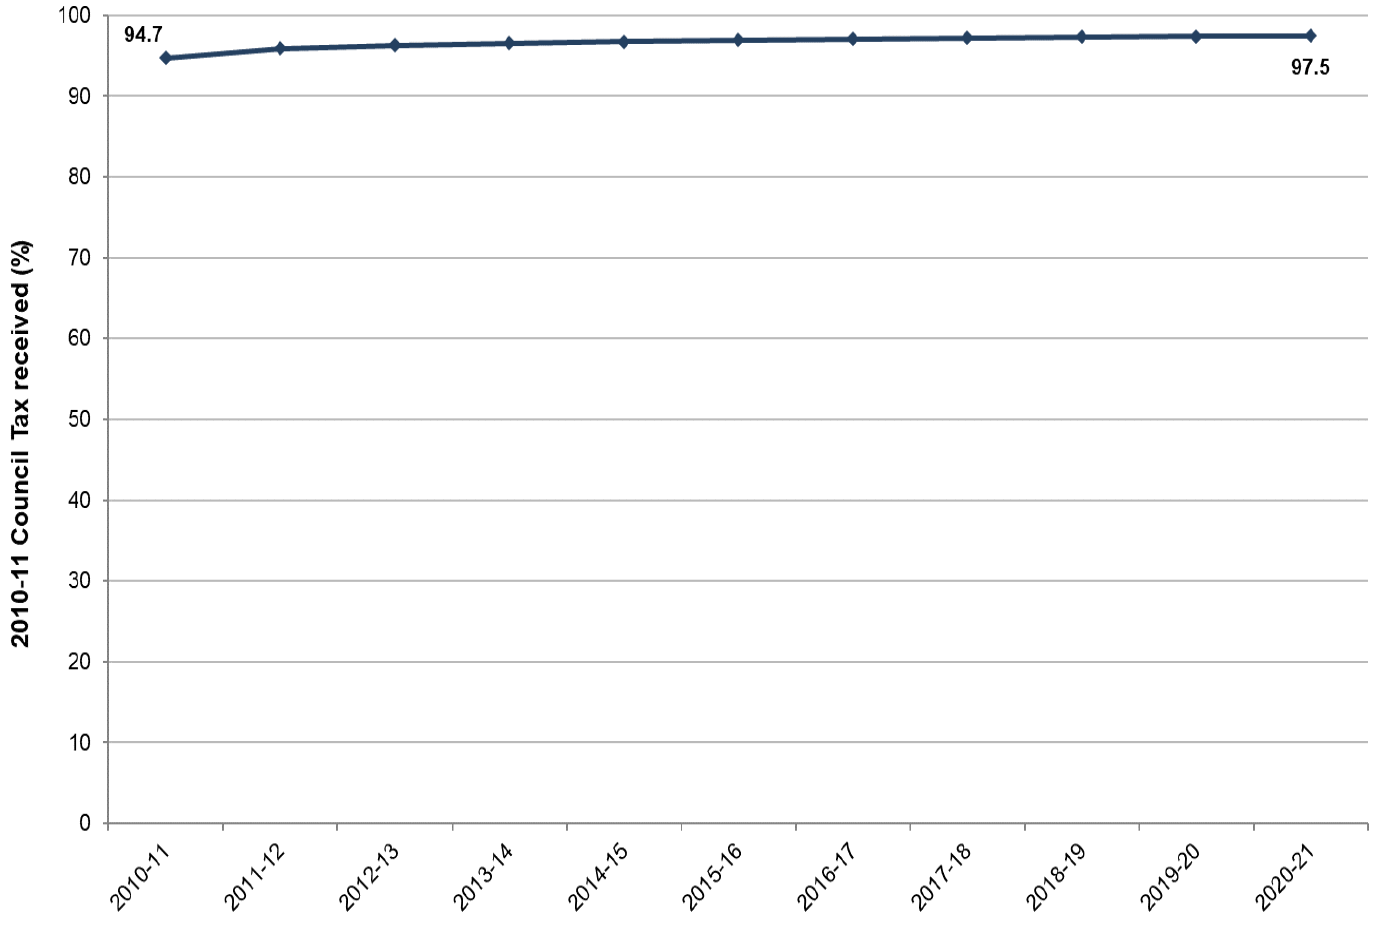 Line chart showing 2010-11 council tax percentage received as at 31 March each year from 2010-11 to 2020-21